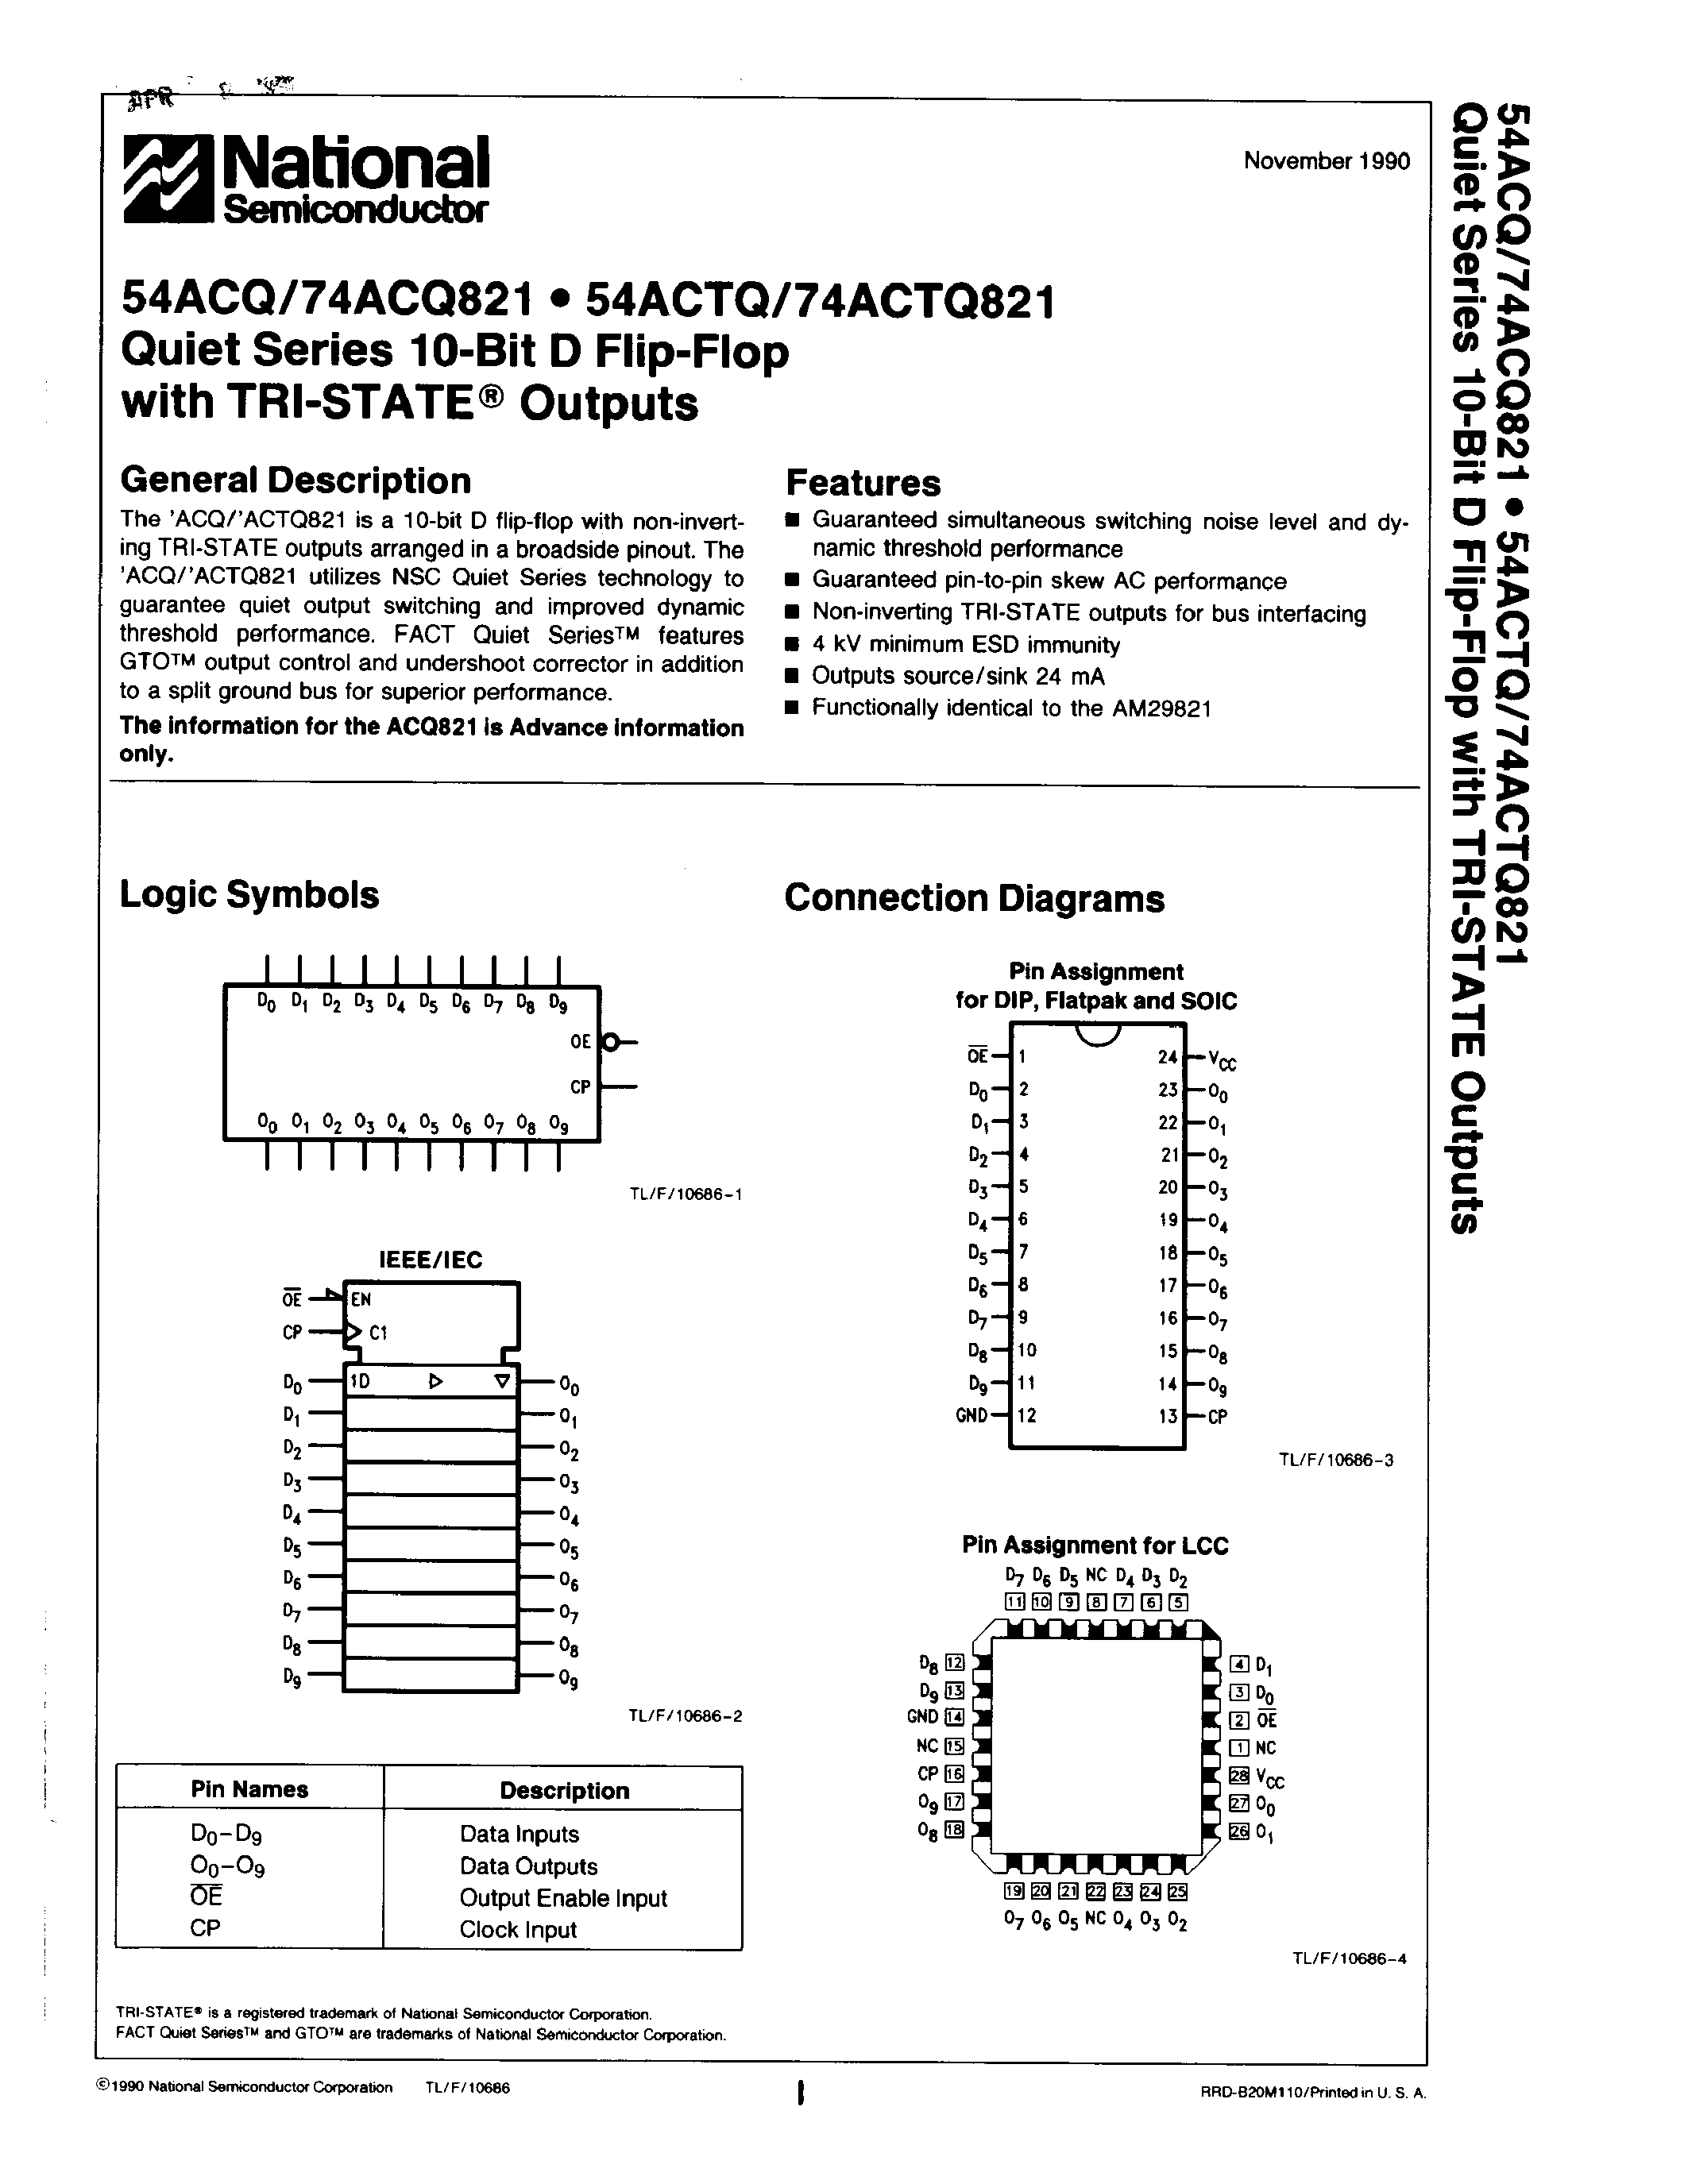 Datasheet 74ACTQ821SD - Quiet Series 10-Bit D Flip-Flop with TRI-STATE Outputs page 1